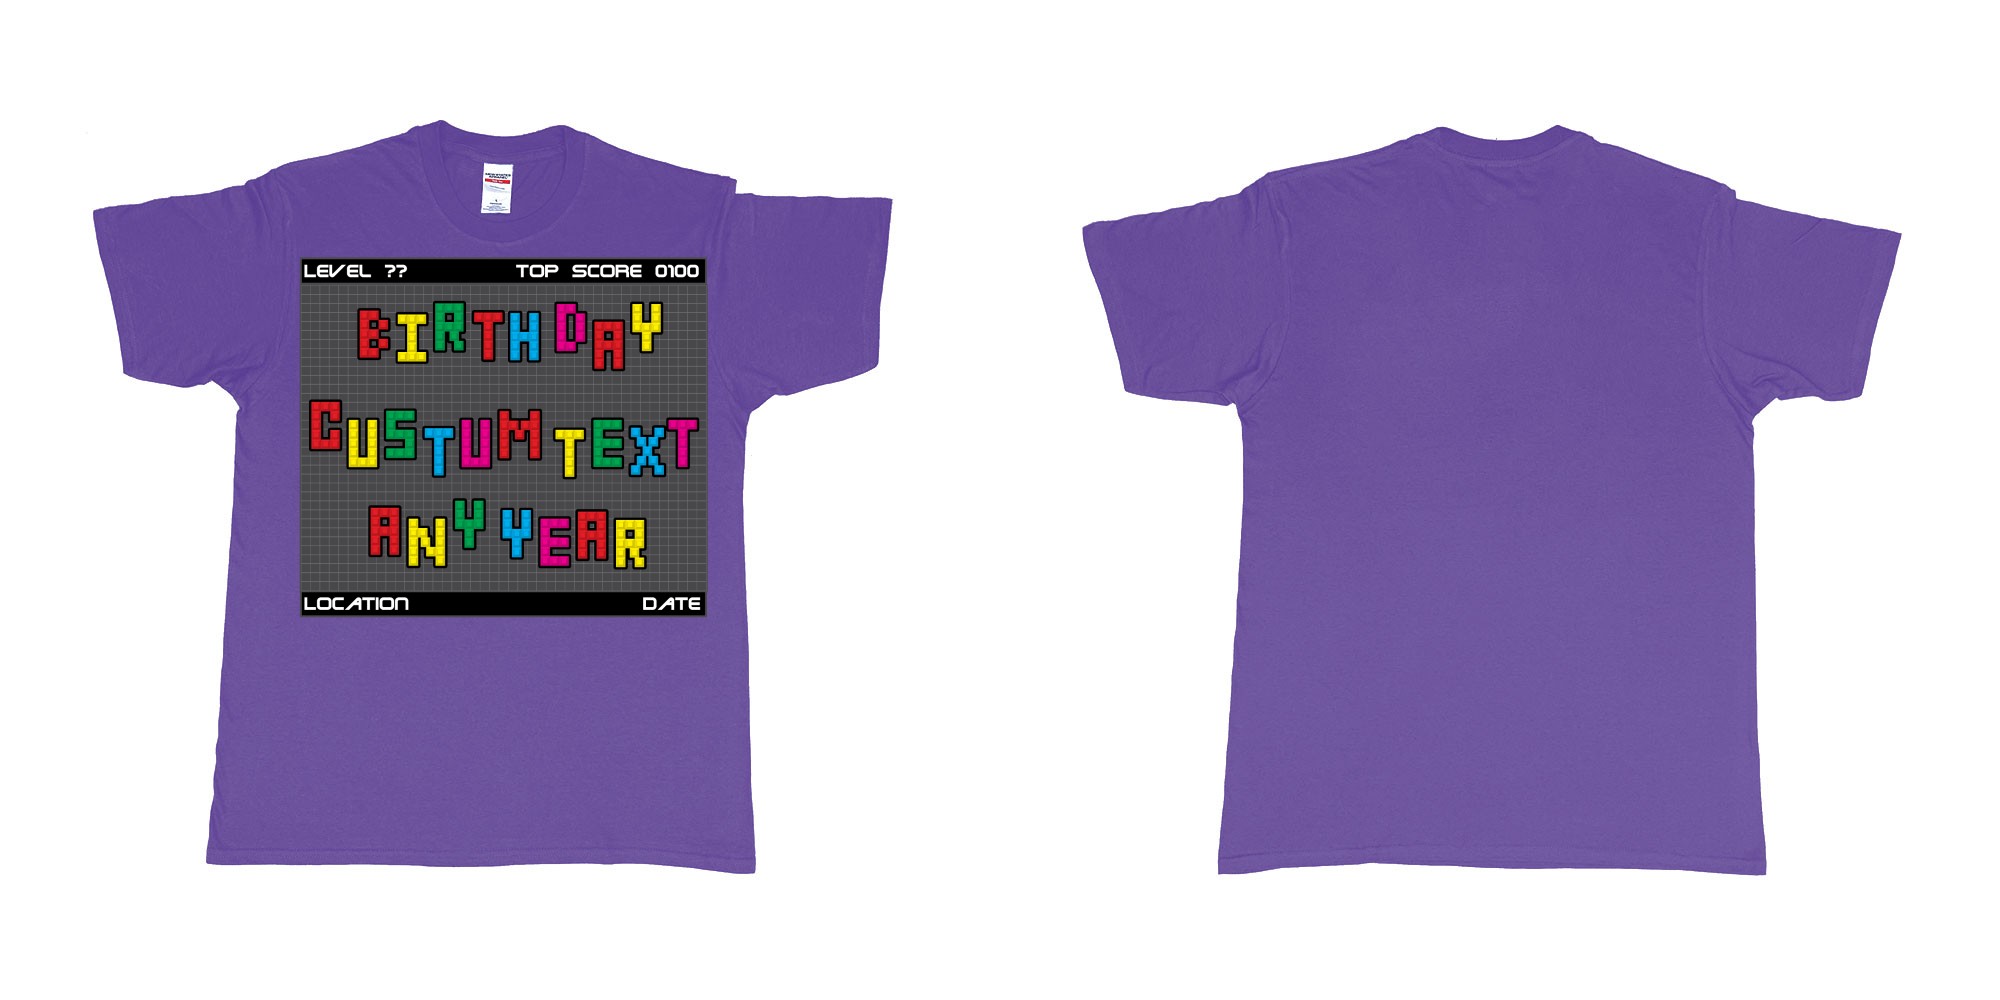 Custom tshirt design tetris block custom text birthday in fabric color purple choice your own text made in Bali by The Pirate Way